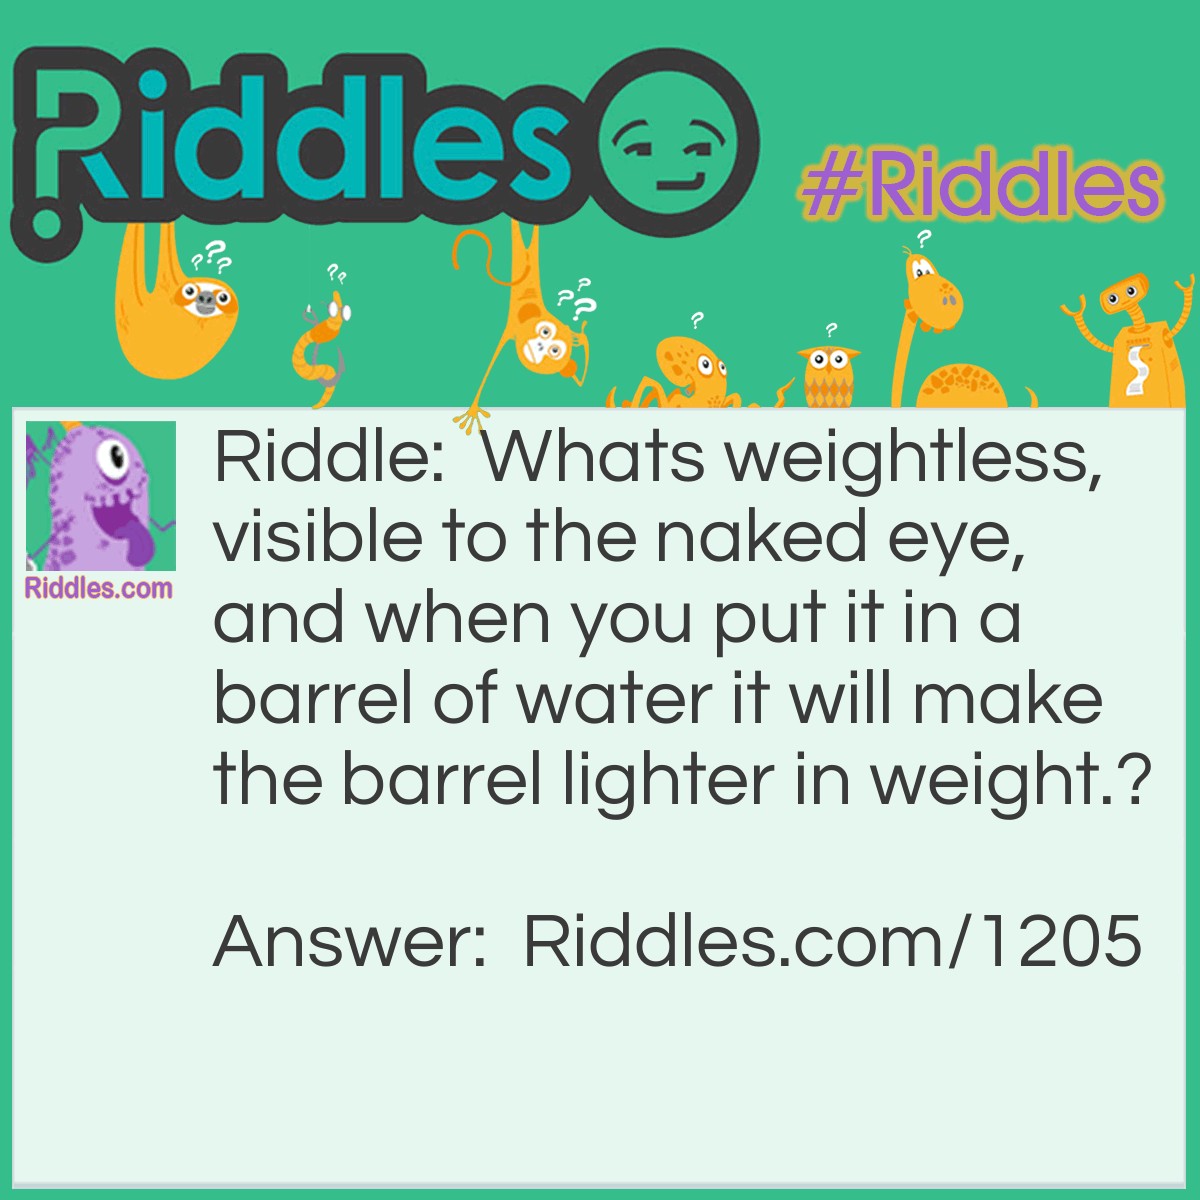 Riddle: What's weightless, visible to the naked eye, and when you put it in a barrel of water it will make the barrel lighter in weight? Answer: A hole!